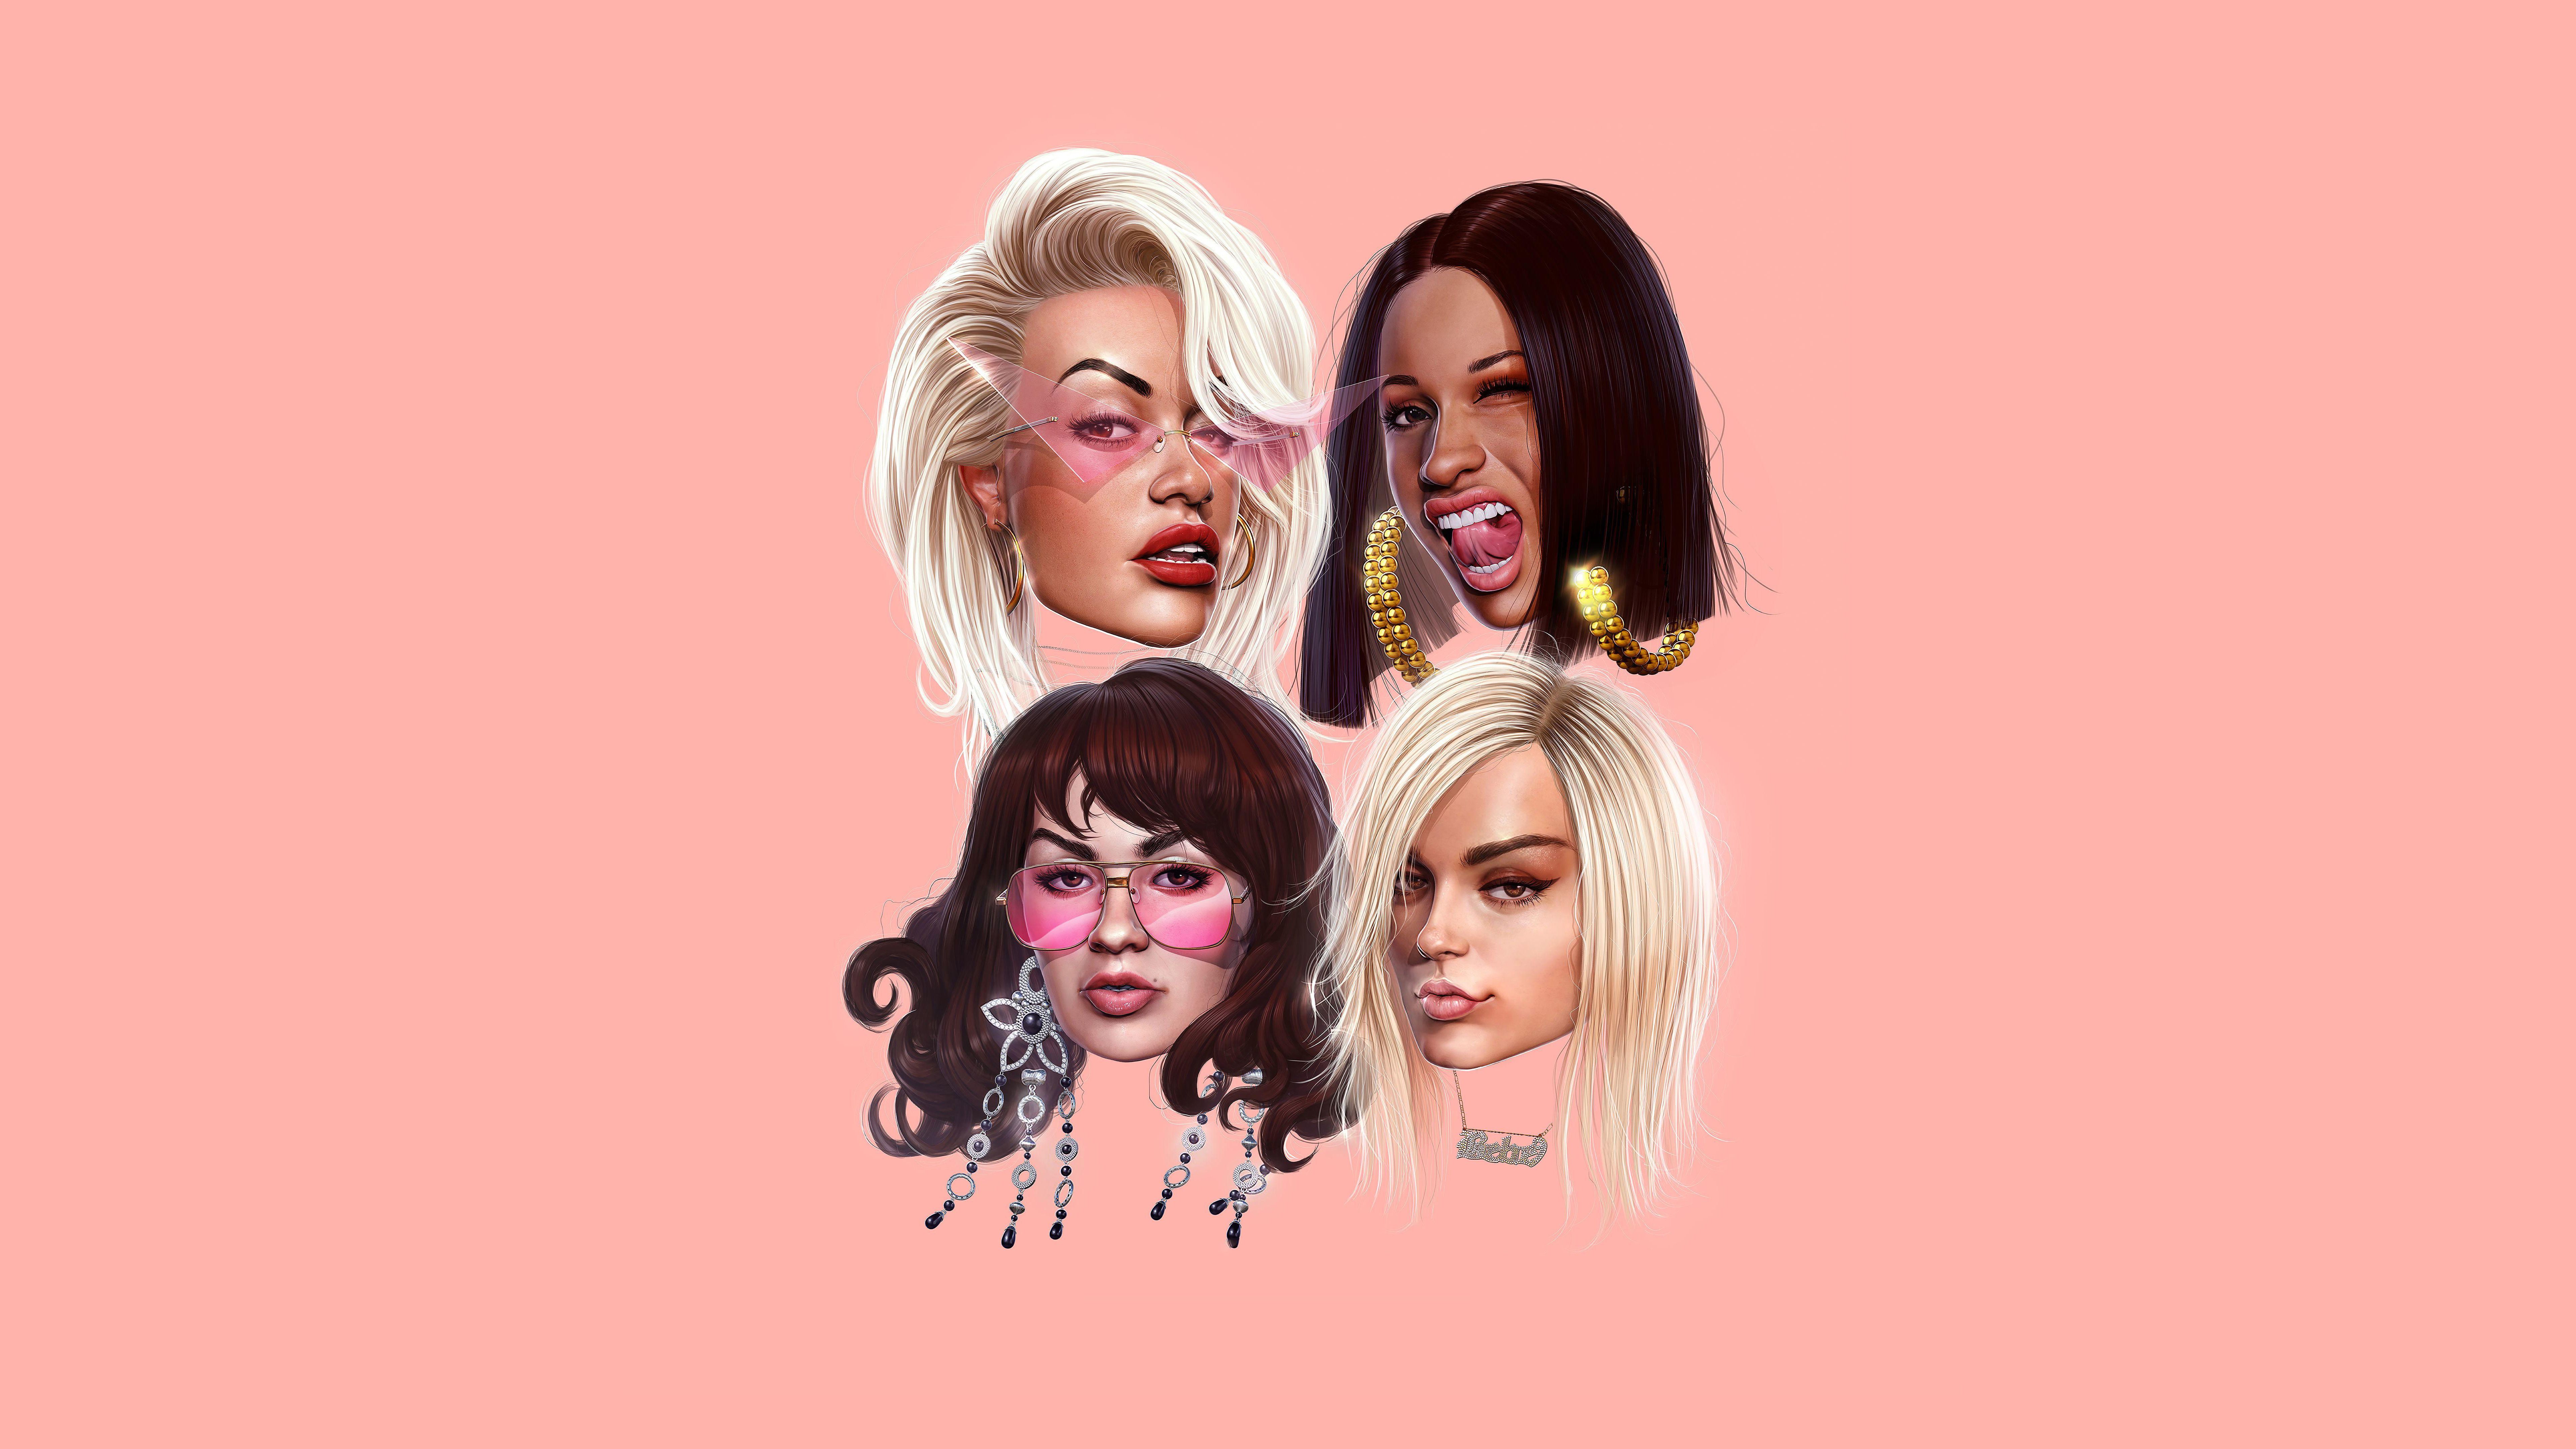 4 female pop stars with different hair styles and accessories on a pink background - Cardi B